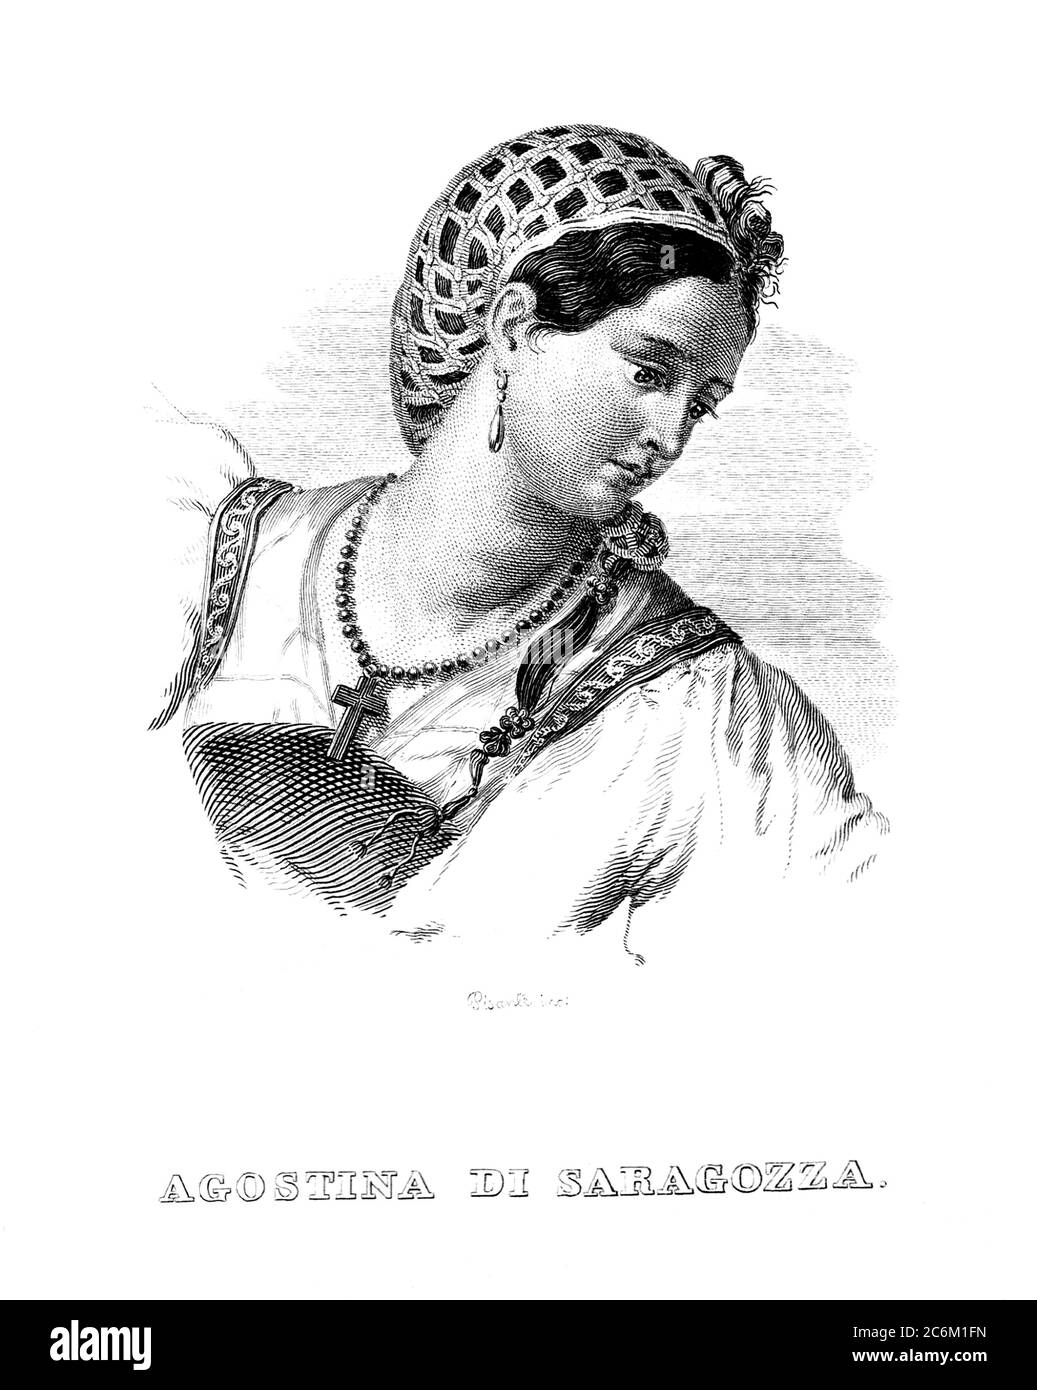 1808 c, Zaragoza , SPAIN : The spanish heroine patriot Agustina Raimunda Maria Saragossa i Domènech aka Agustina de Aragón ( 1786 - 1857 ) known as The Spanish Joan of Arc . Subject of much folklore, mythology, and artwork, including sketches by Francisco Goya and the poetry of Lord Byron . Engraving by italian artist Pisante , pubblished in 1843 .- PORTRAIT - RITRATTO - AGOSTINA DI SARAGOZZA  d'ARAGONA - engraving - incisione - SPAGNA  ----  Archivio GBB Stock Photo